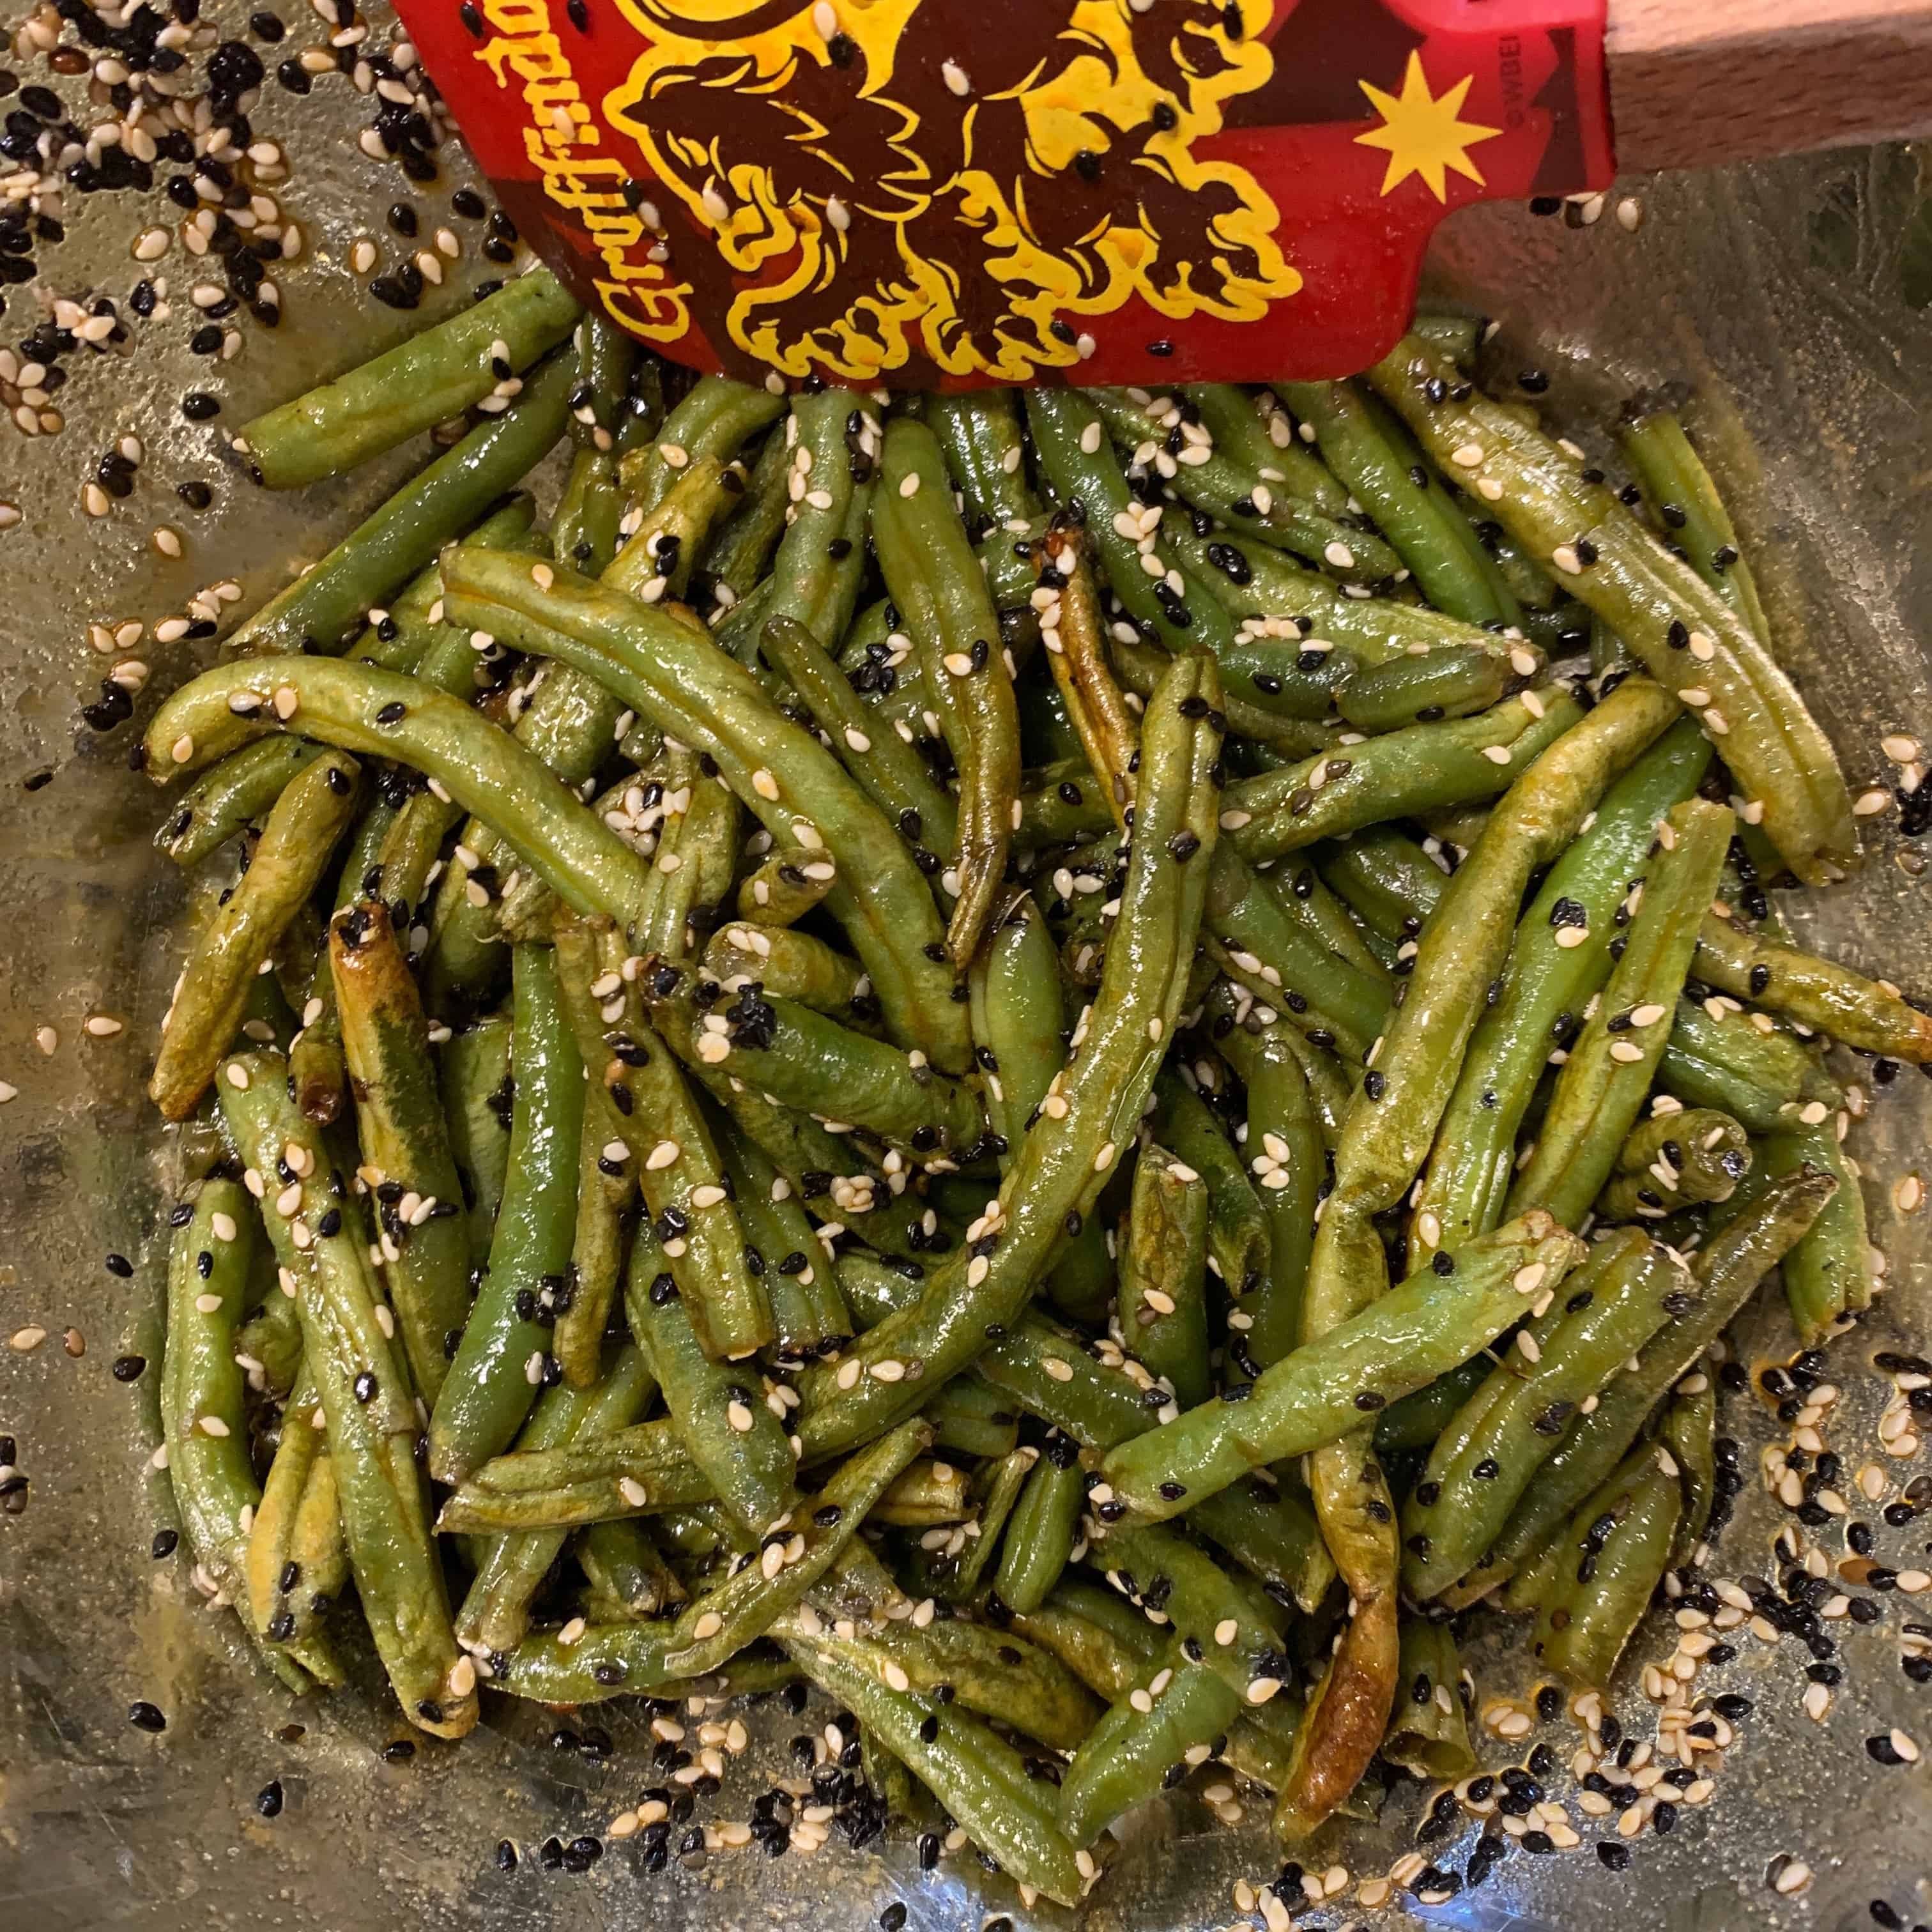 green beans tossed in the sesame seed and oil mixture